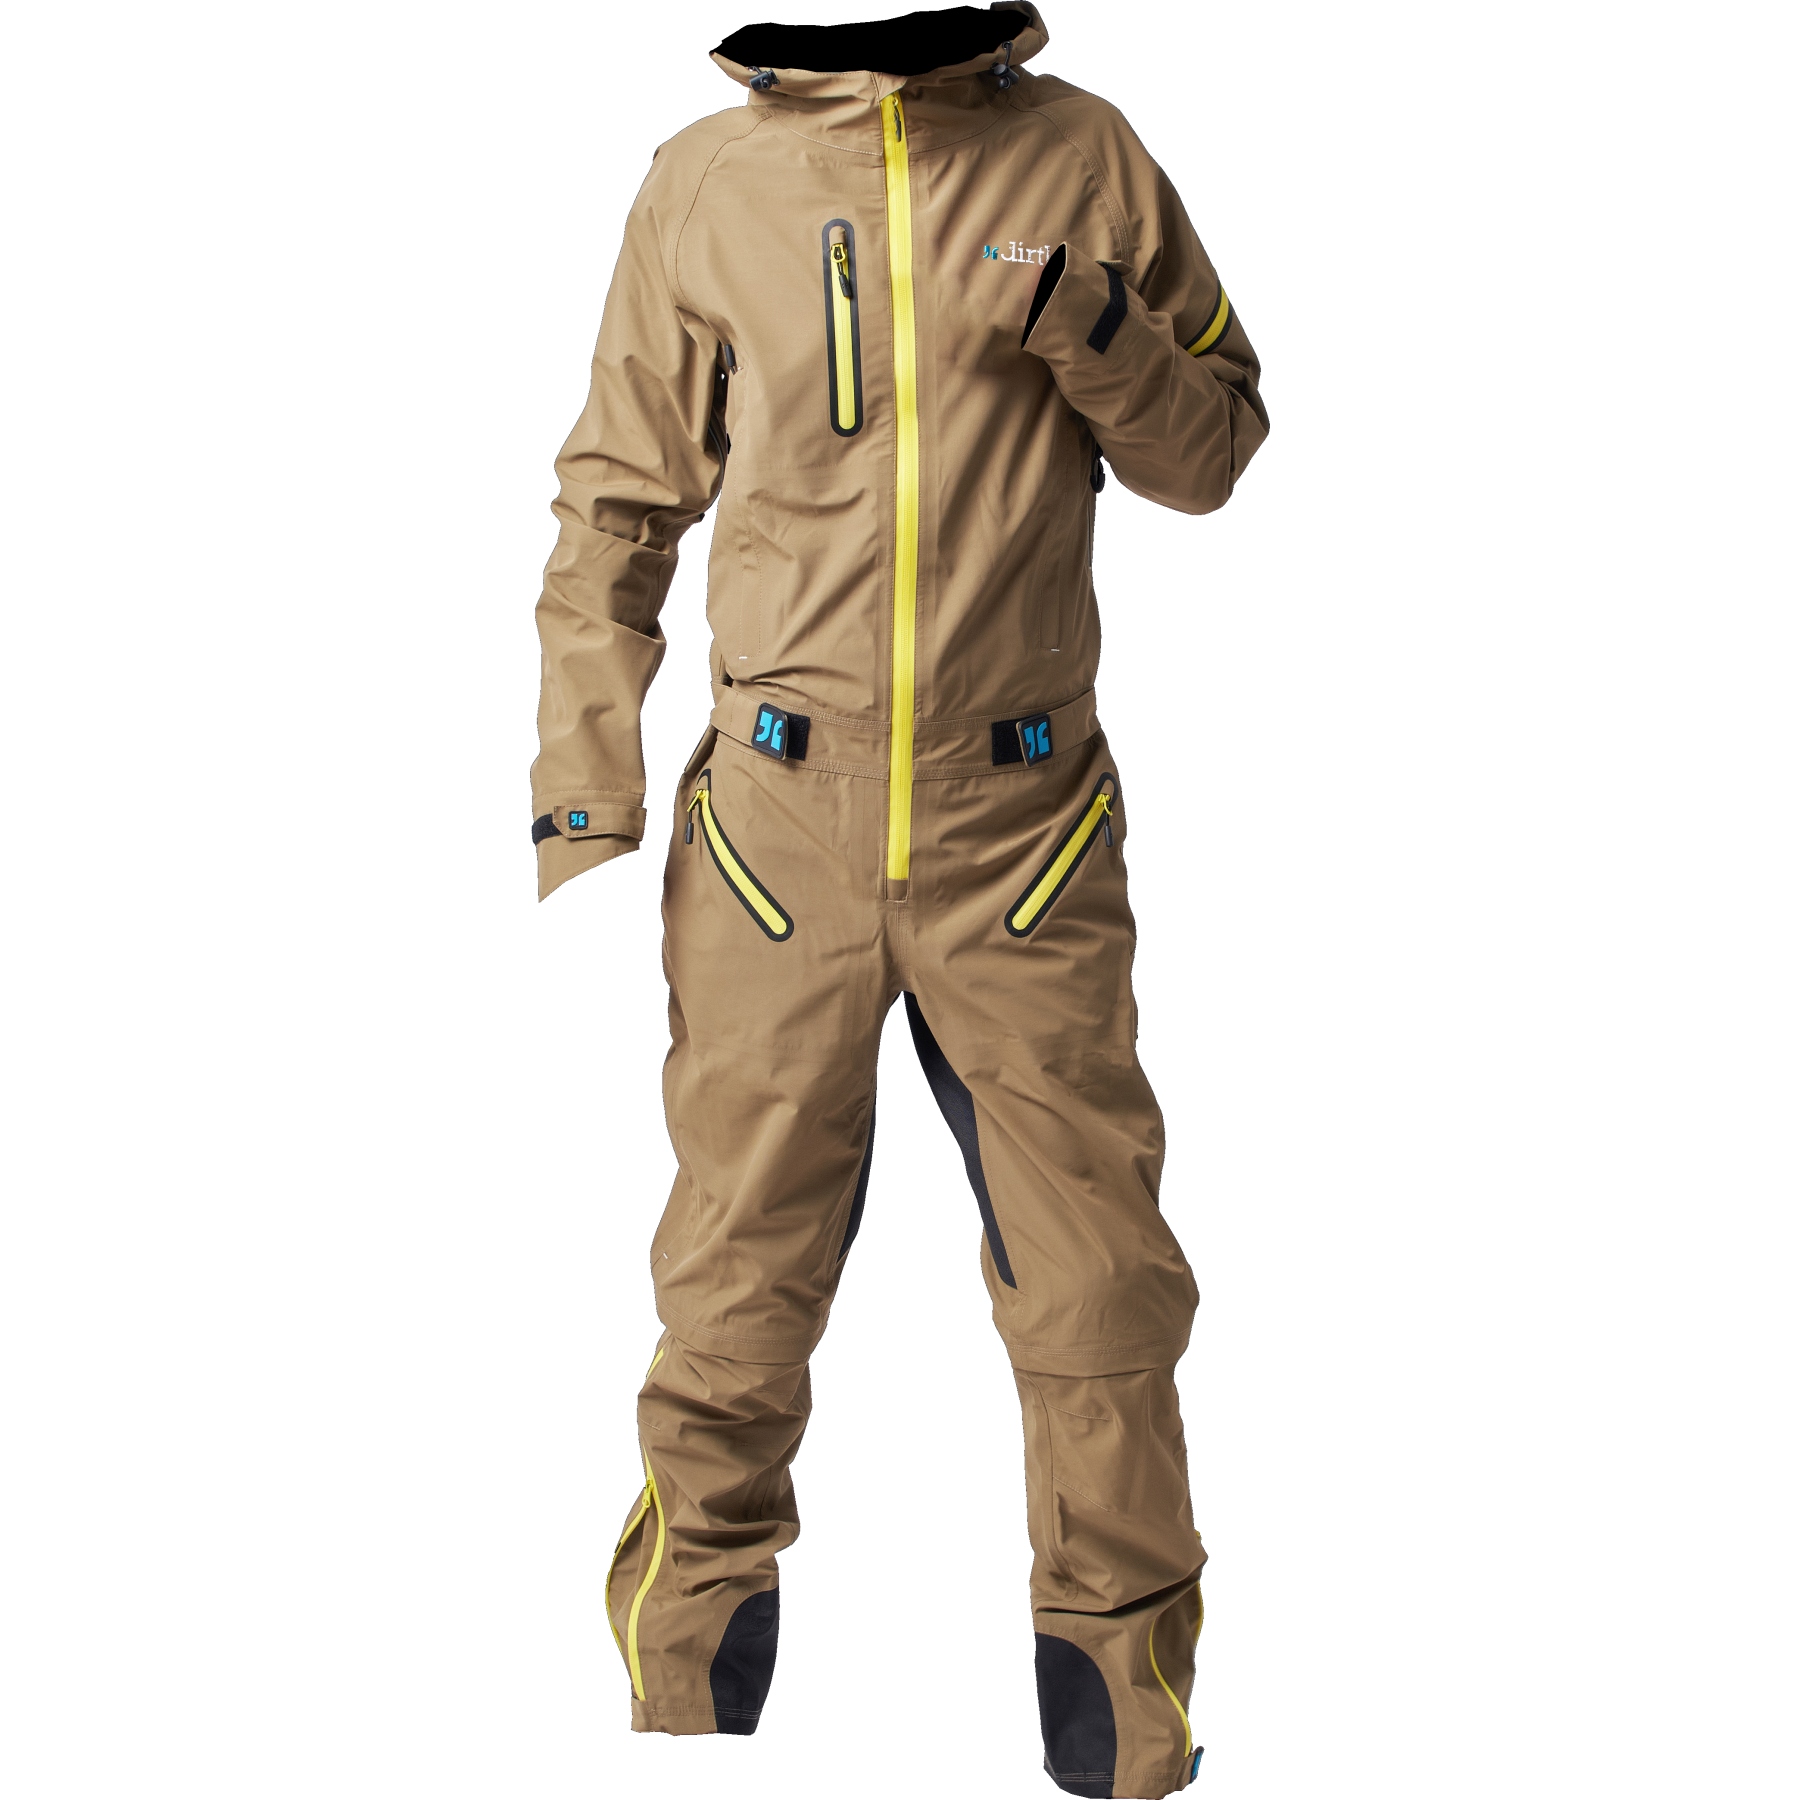 Picture of Dirtlej Dirtsuit Core Edition - sand/yellow